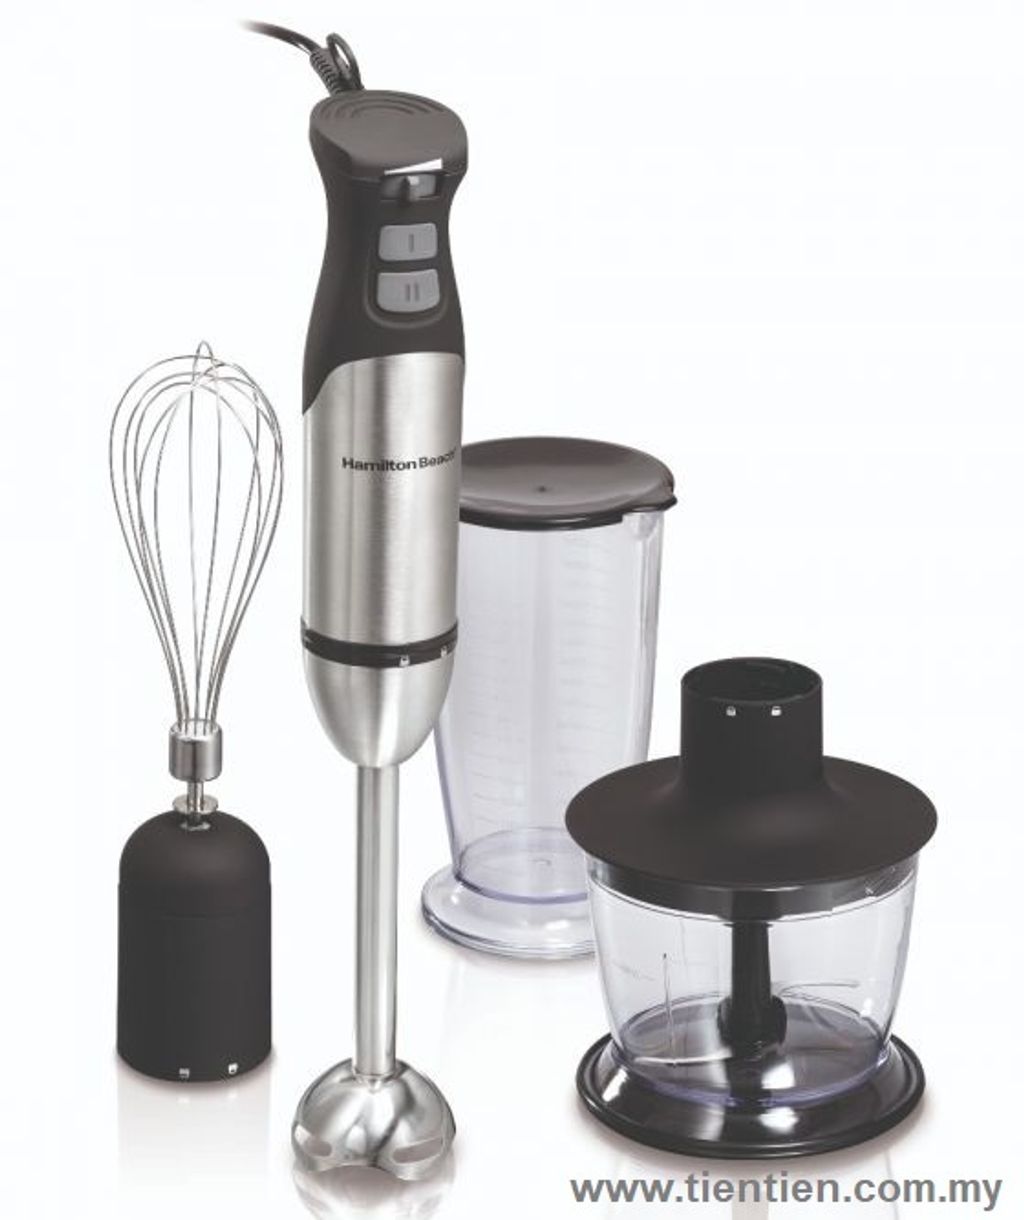 hb-hand-manual-blender-multipurposes-5in1-variable-speed-baking-cooking-whisking-59769-sau-a-tien-tien-malaysia.jpg